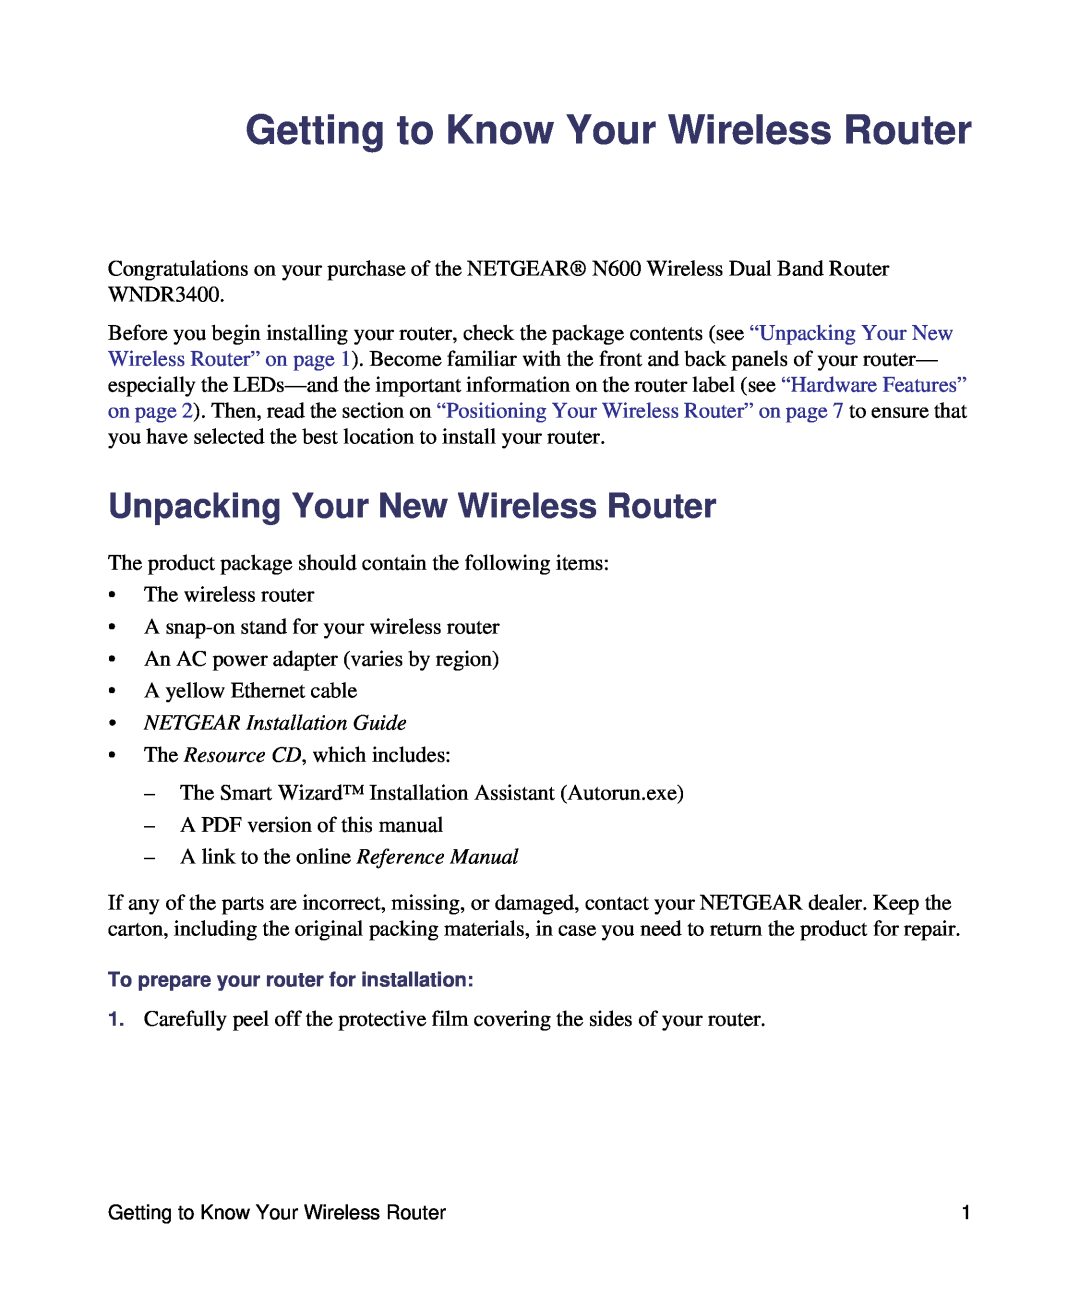 NETGEAR WNDR3400-100NAS manual Getting to Know Your Wireless Router, Unpacking Your New Wireless Router 